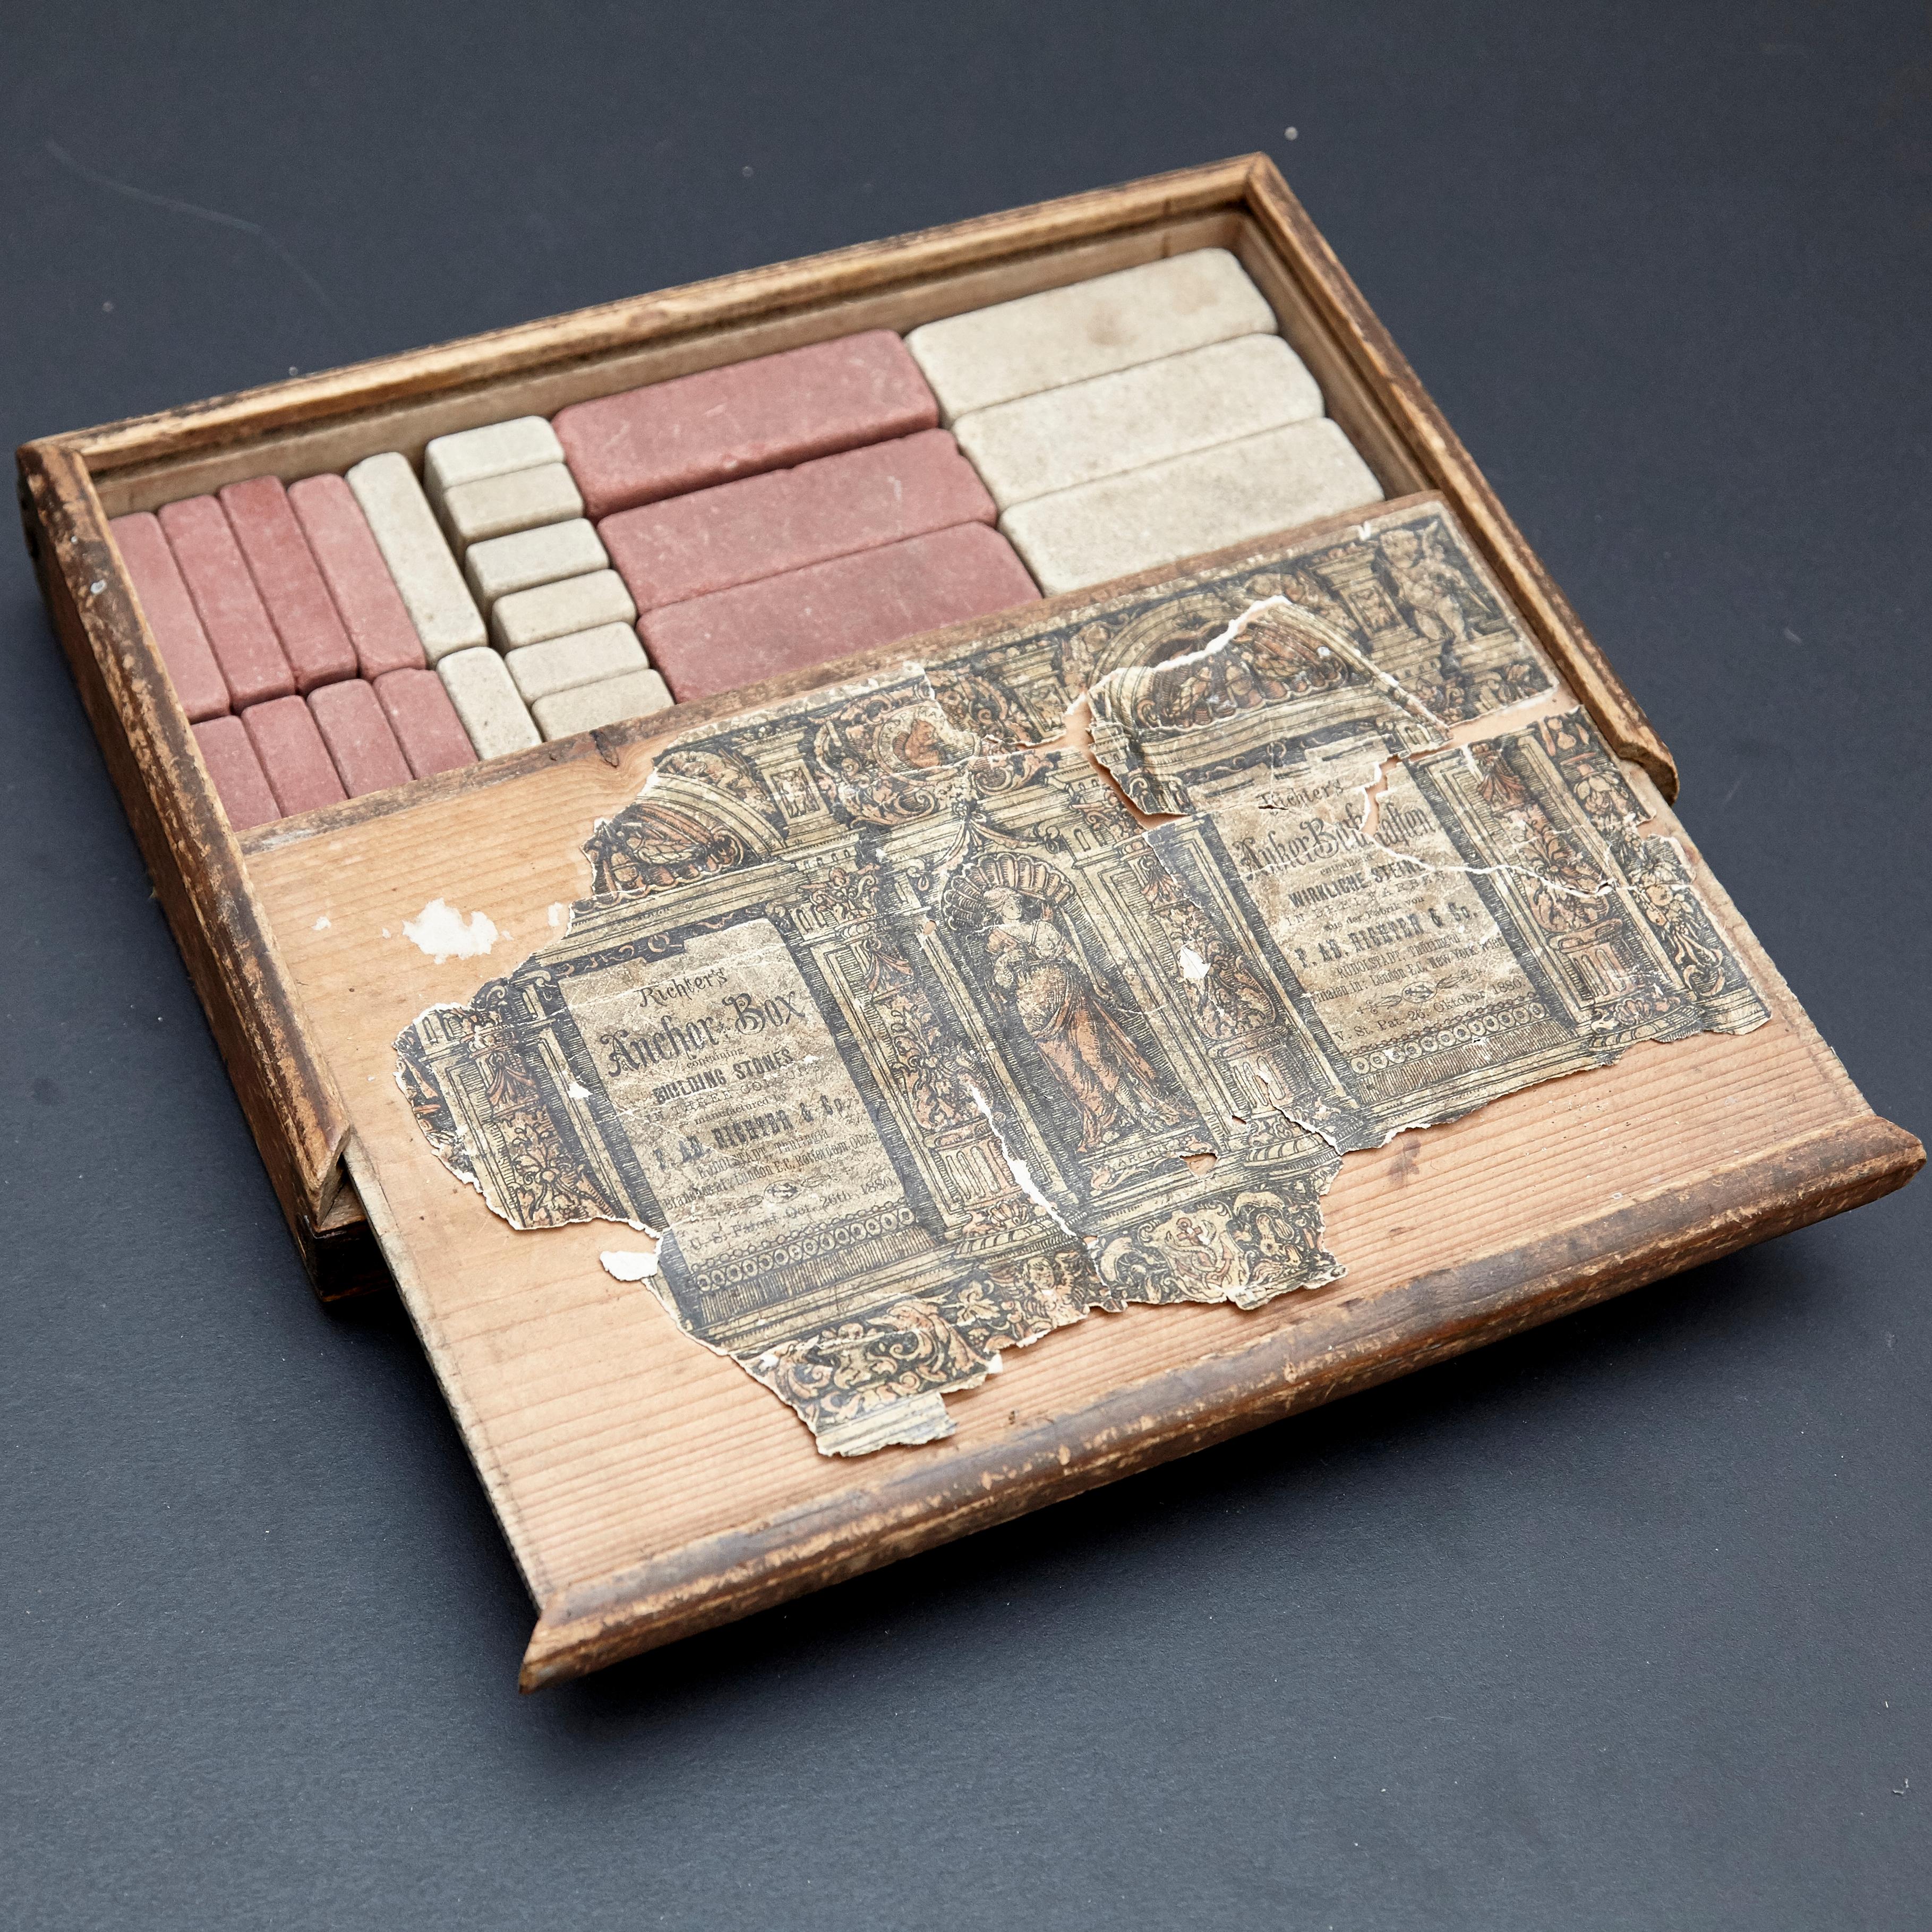 Richters German Anchor blocks building toys / Der Geschickte Baumeister 
Made in Rudolstadt, Germany, circa 1900. 

Wooden box with printed paper labels, stone blocks and instructional booklets.

In original condition, weak wooden box and